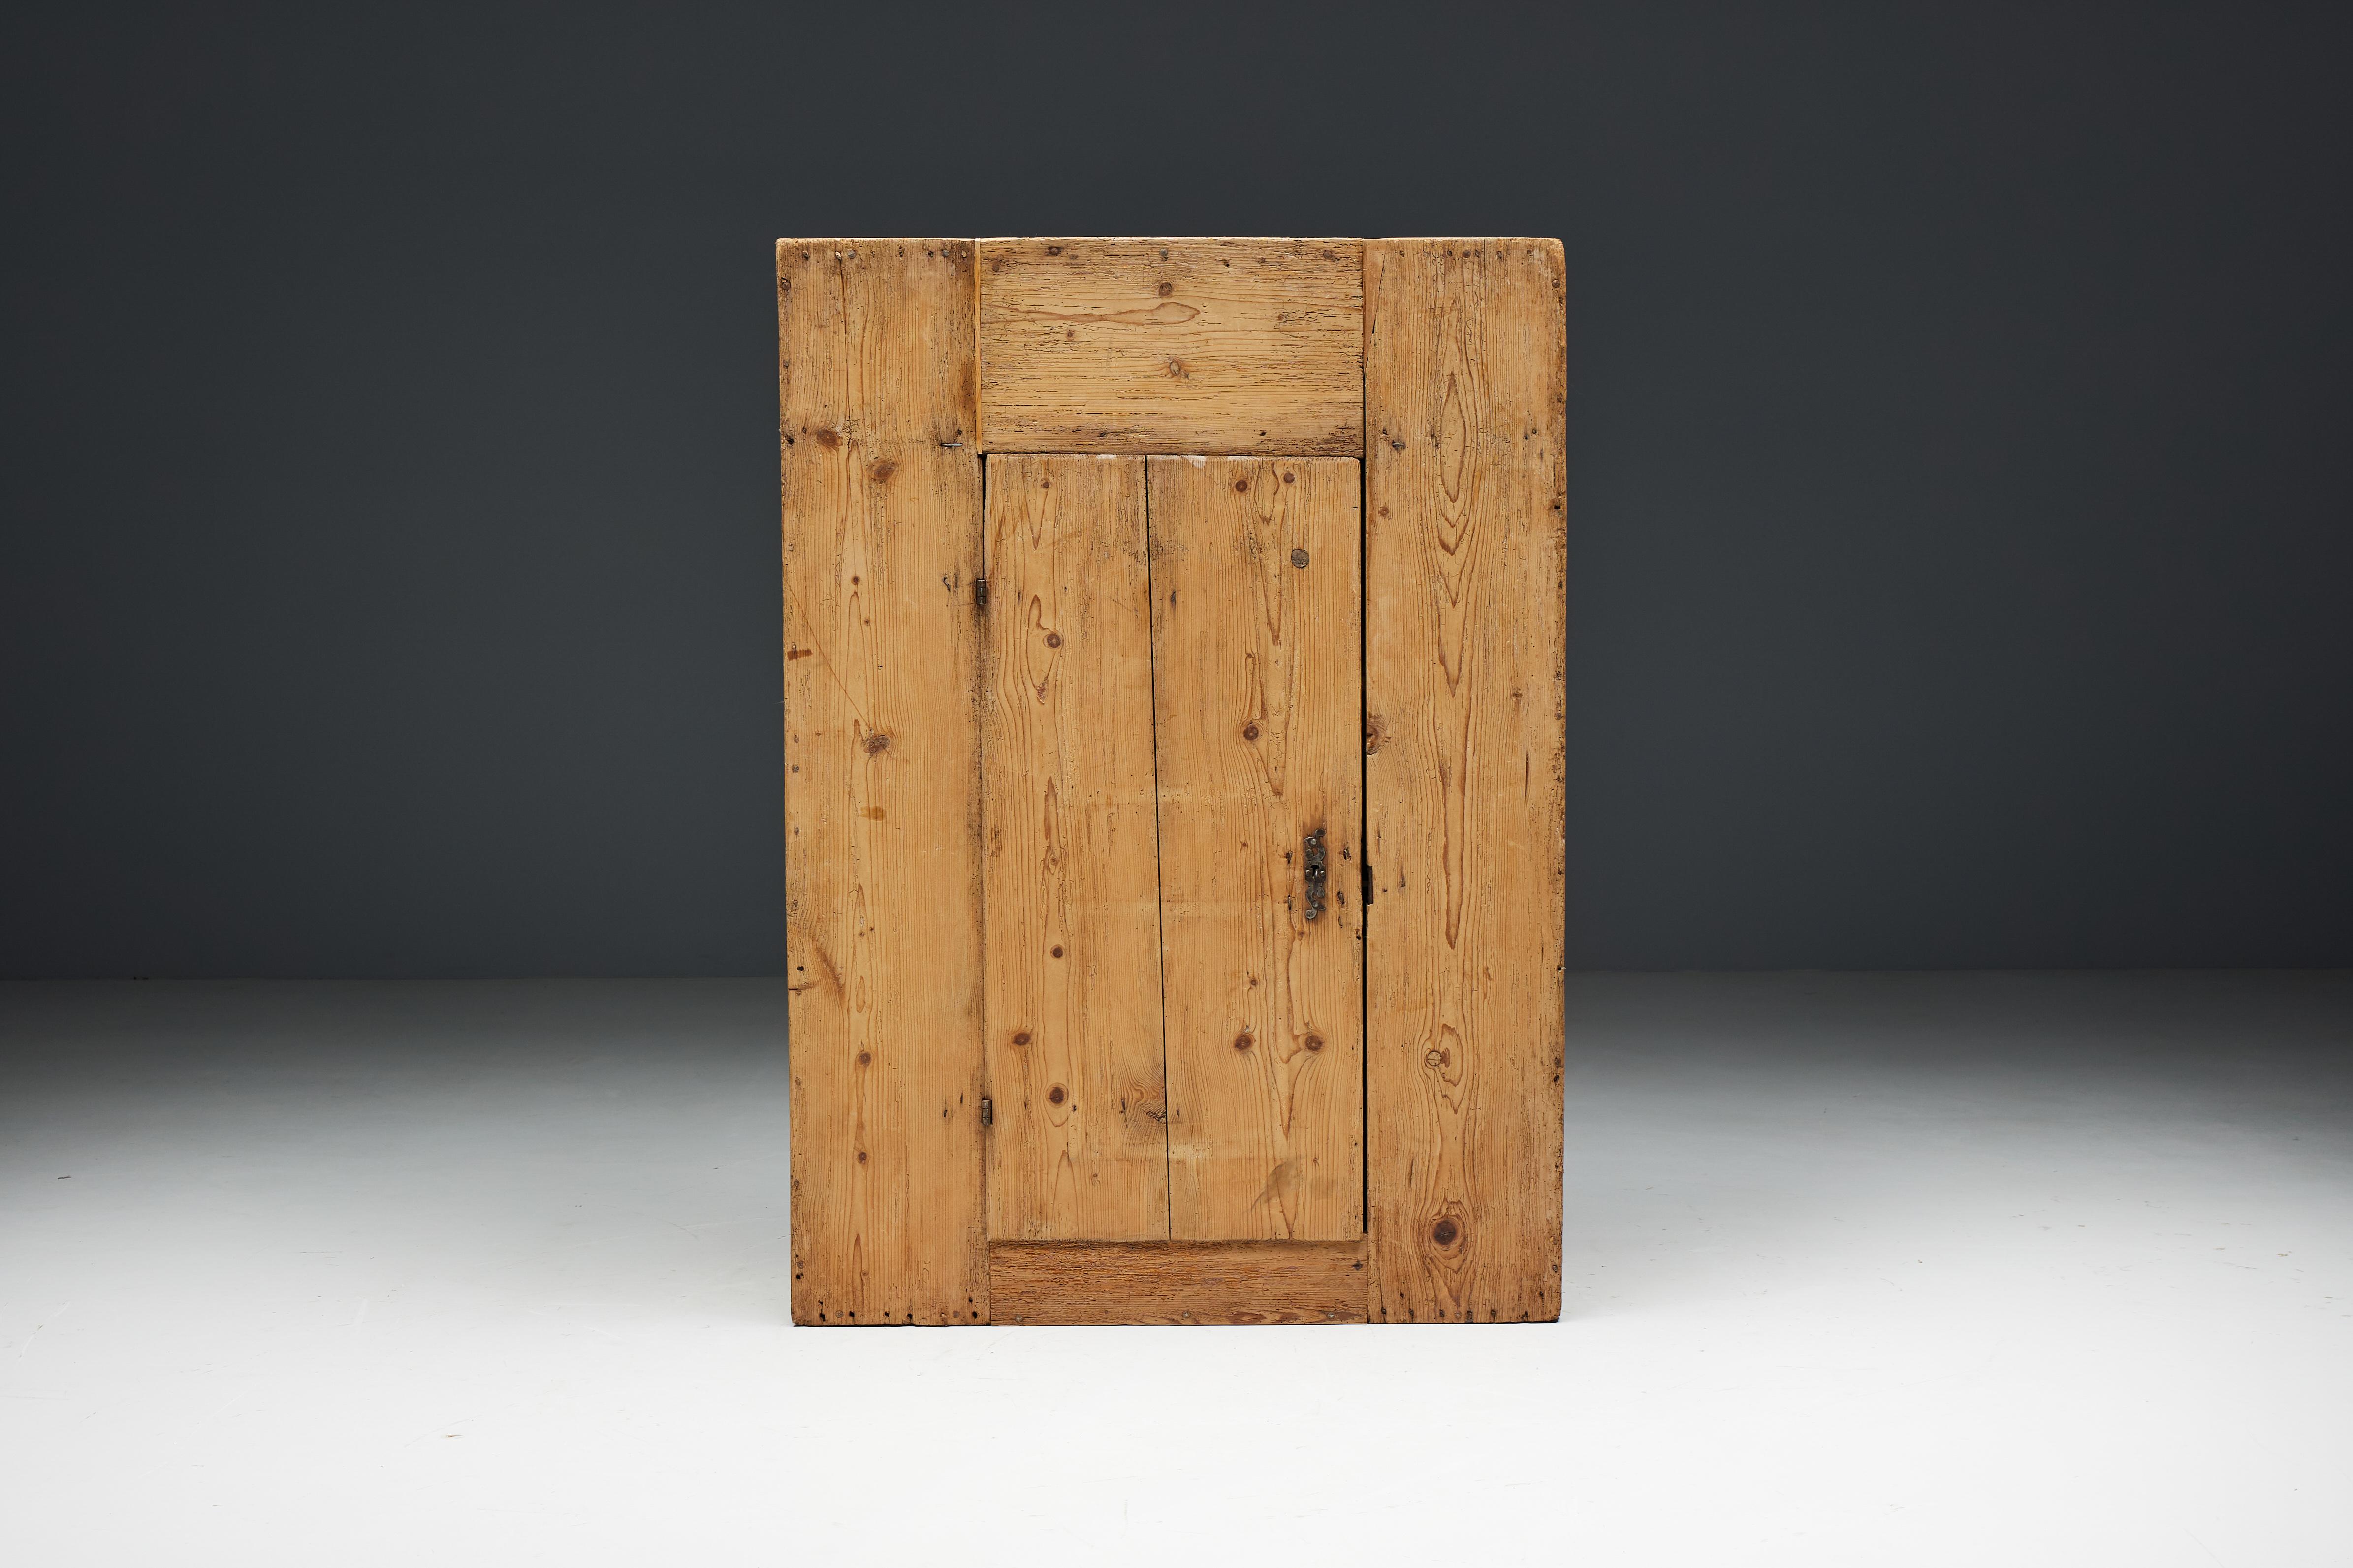 Rustic travail populaire Alpine cabinet made from solid wood in the early 19th century. This organic travail populaire cabinet provides sufficient space to store and display various items. Would be ideal as a wardrobe in a bedroom or hallway,